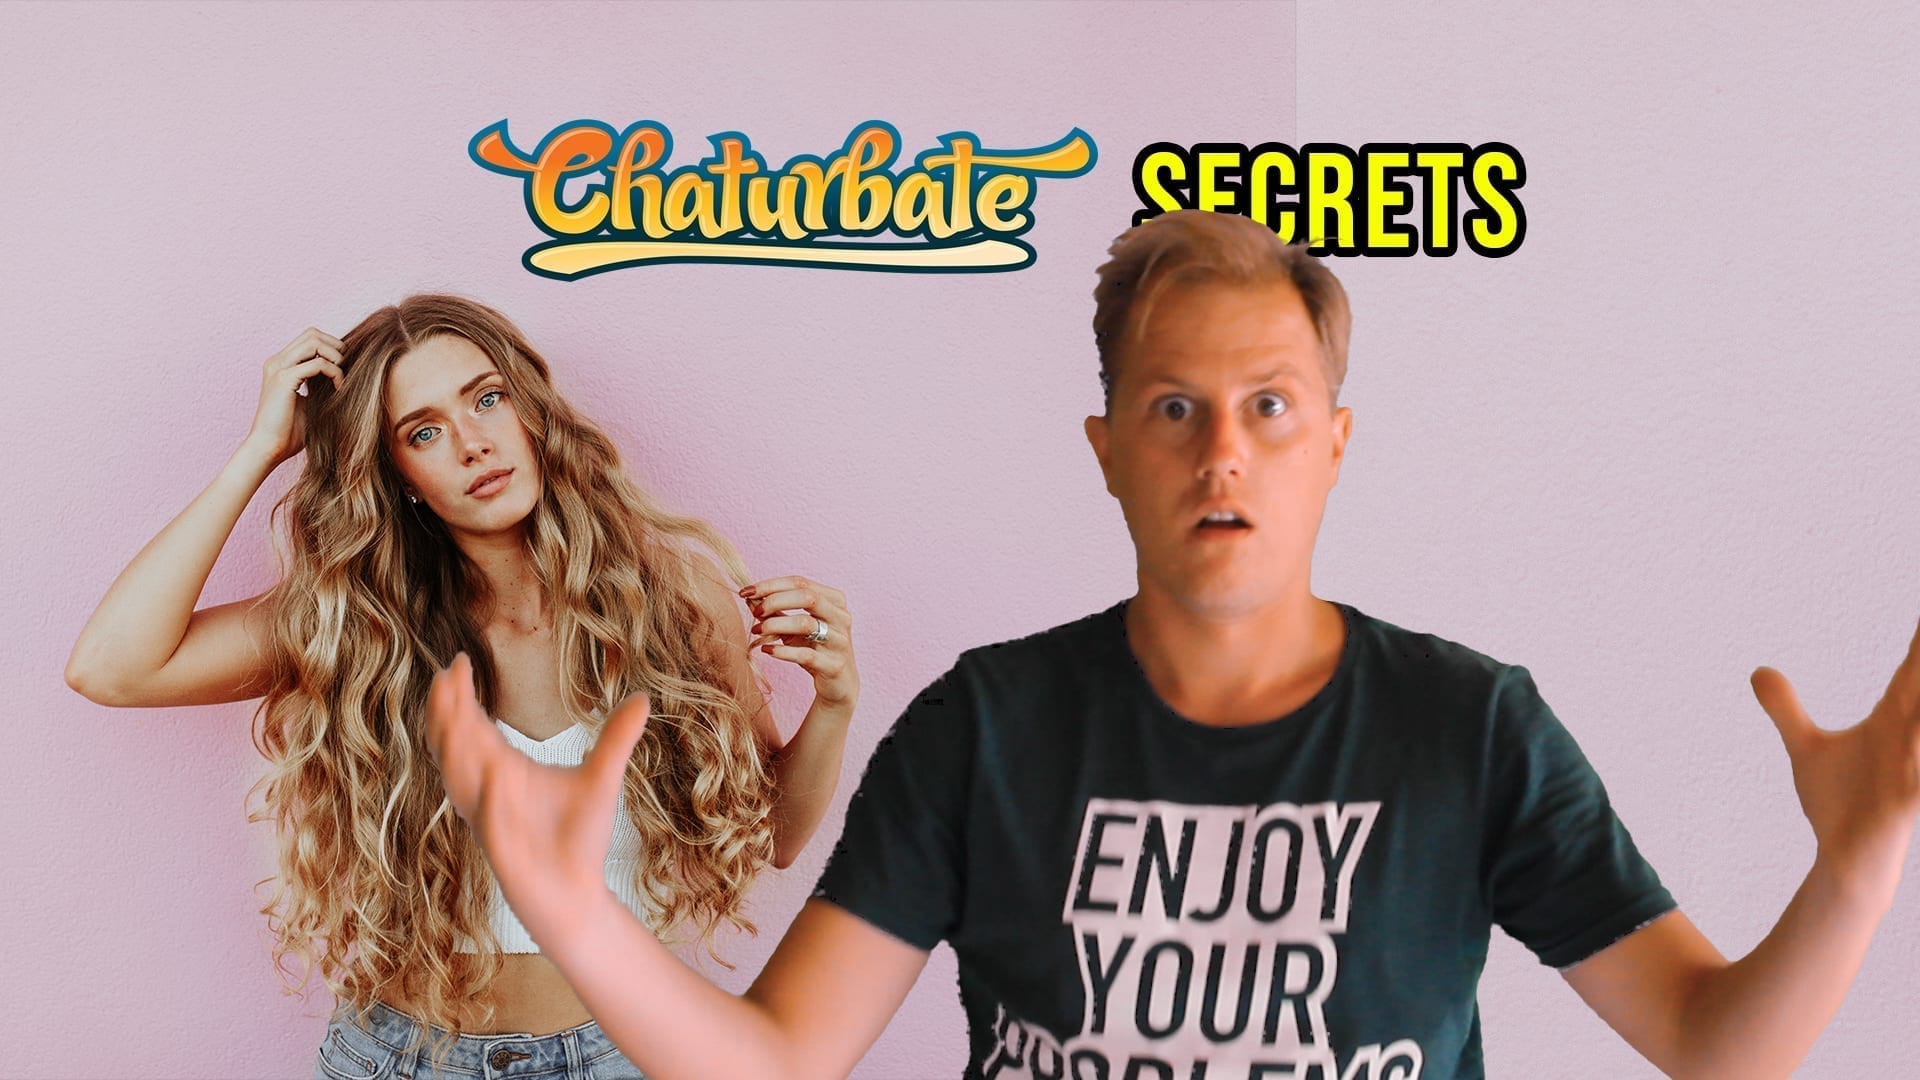 Chaturbate Affiliate trick to earn at least 20% more